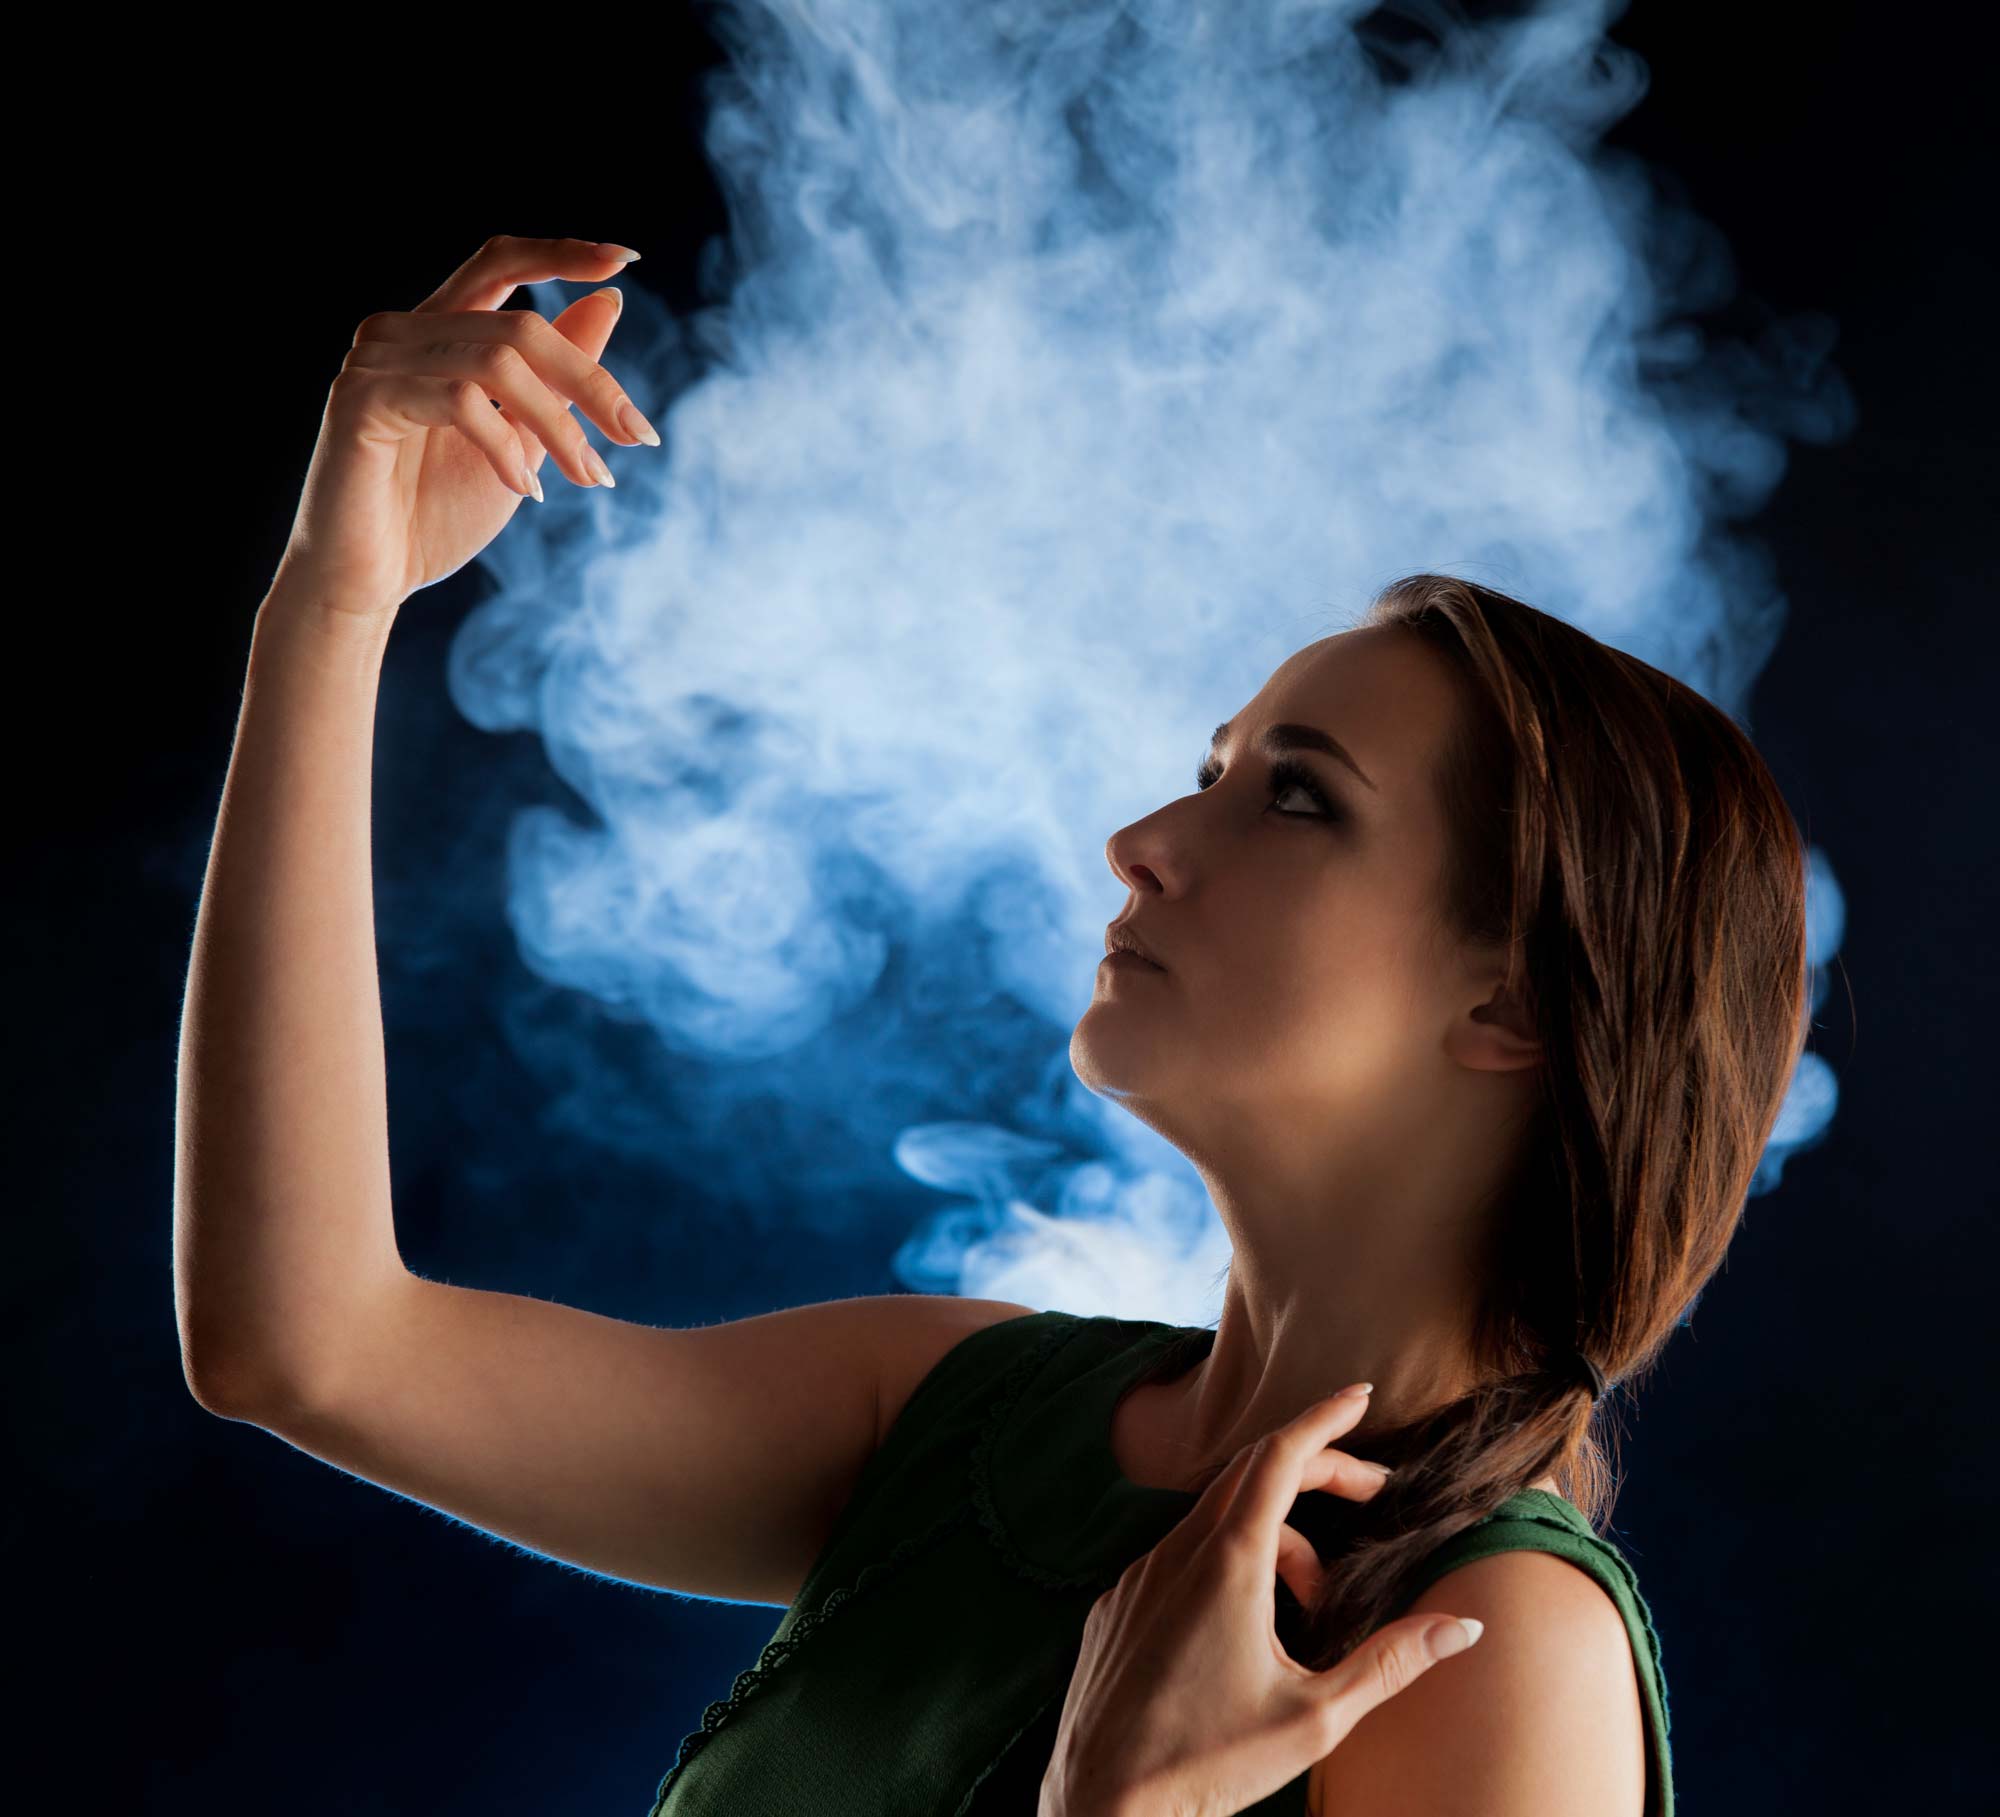 Woman in dramatic portrait with smoke in background | Fashion Photography